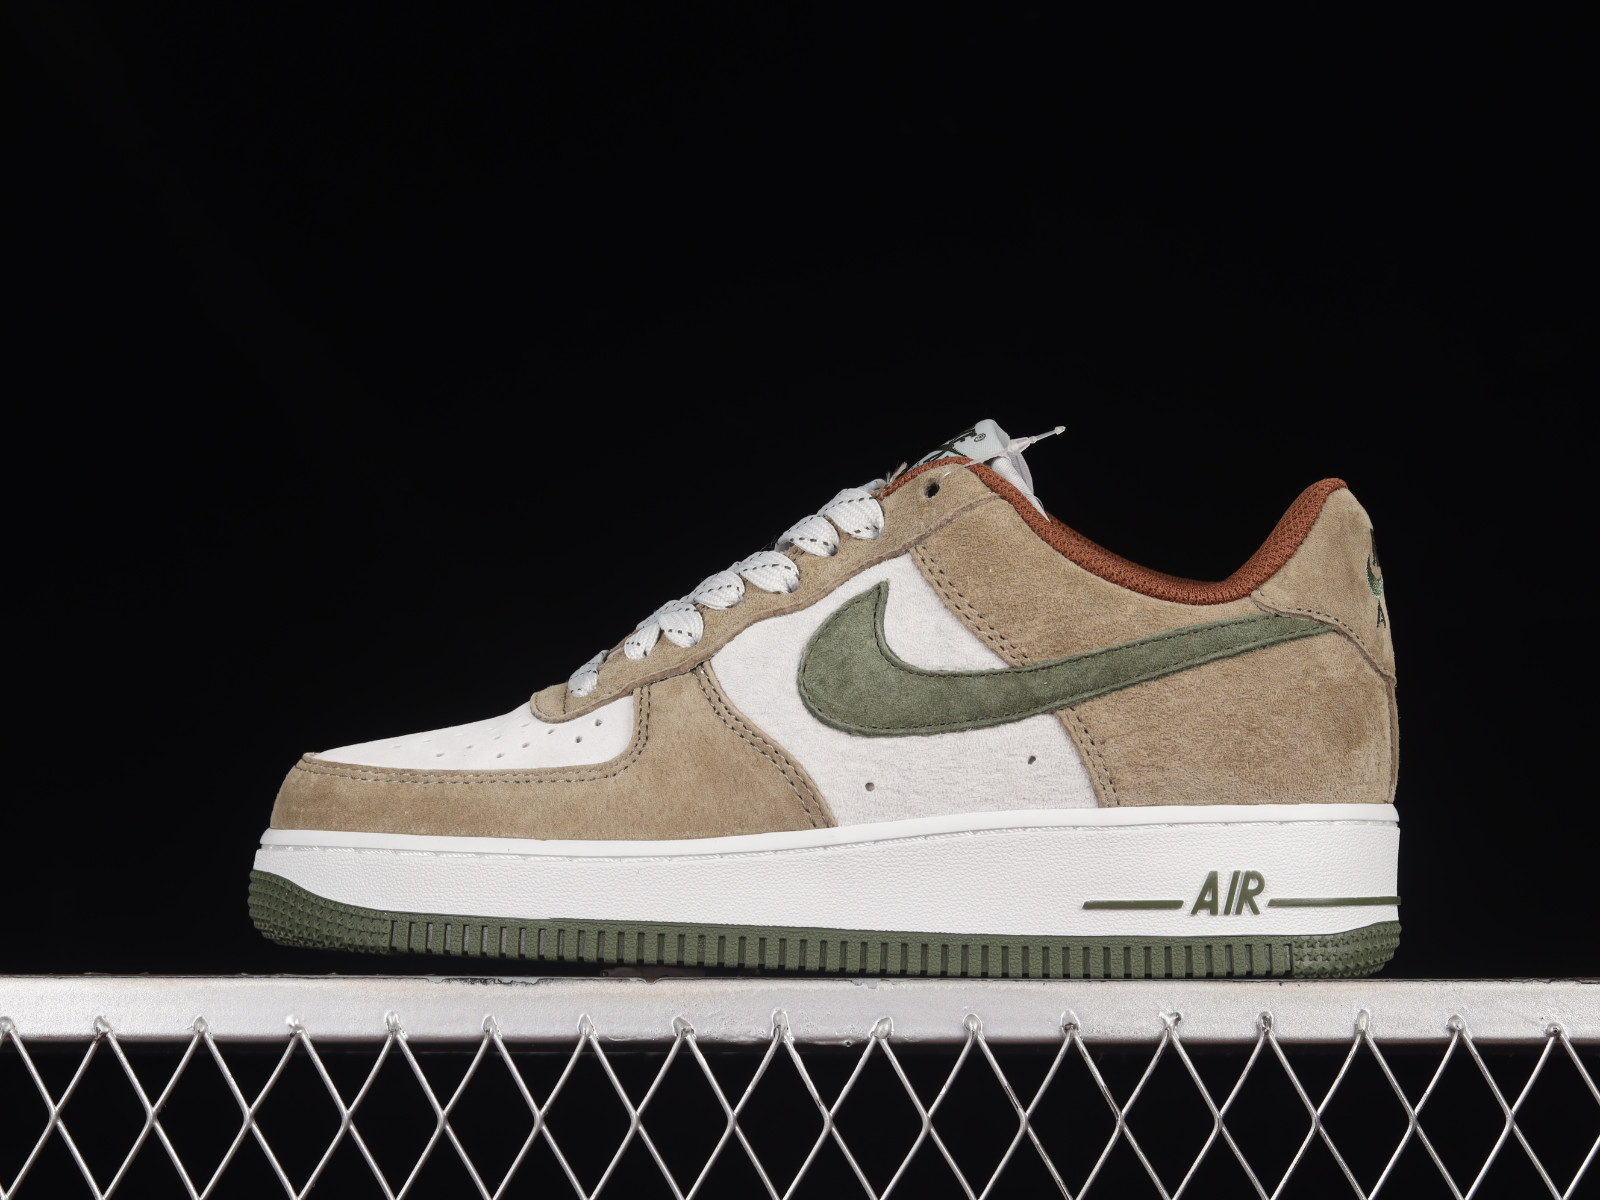 GmarShops - x Nike Air Force 1 07 Low Suede Green Brown White DD3966 - 523 - where to buy nike sb in toronto texas